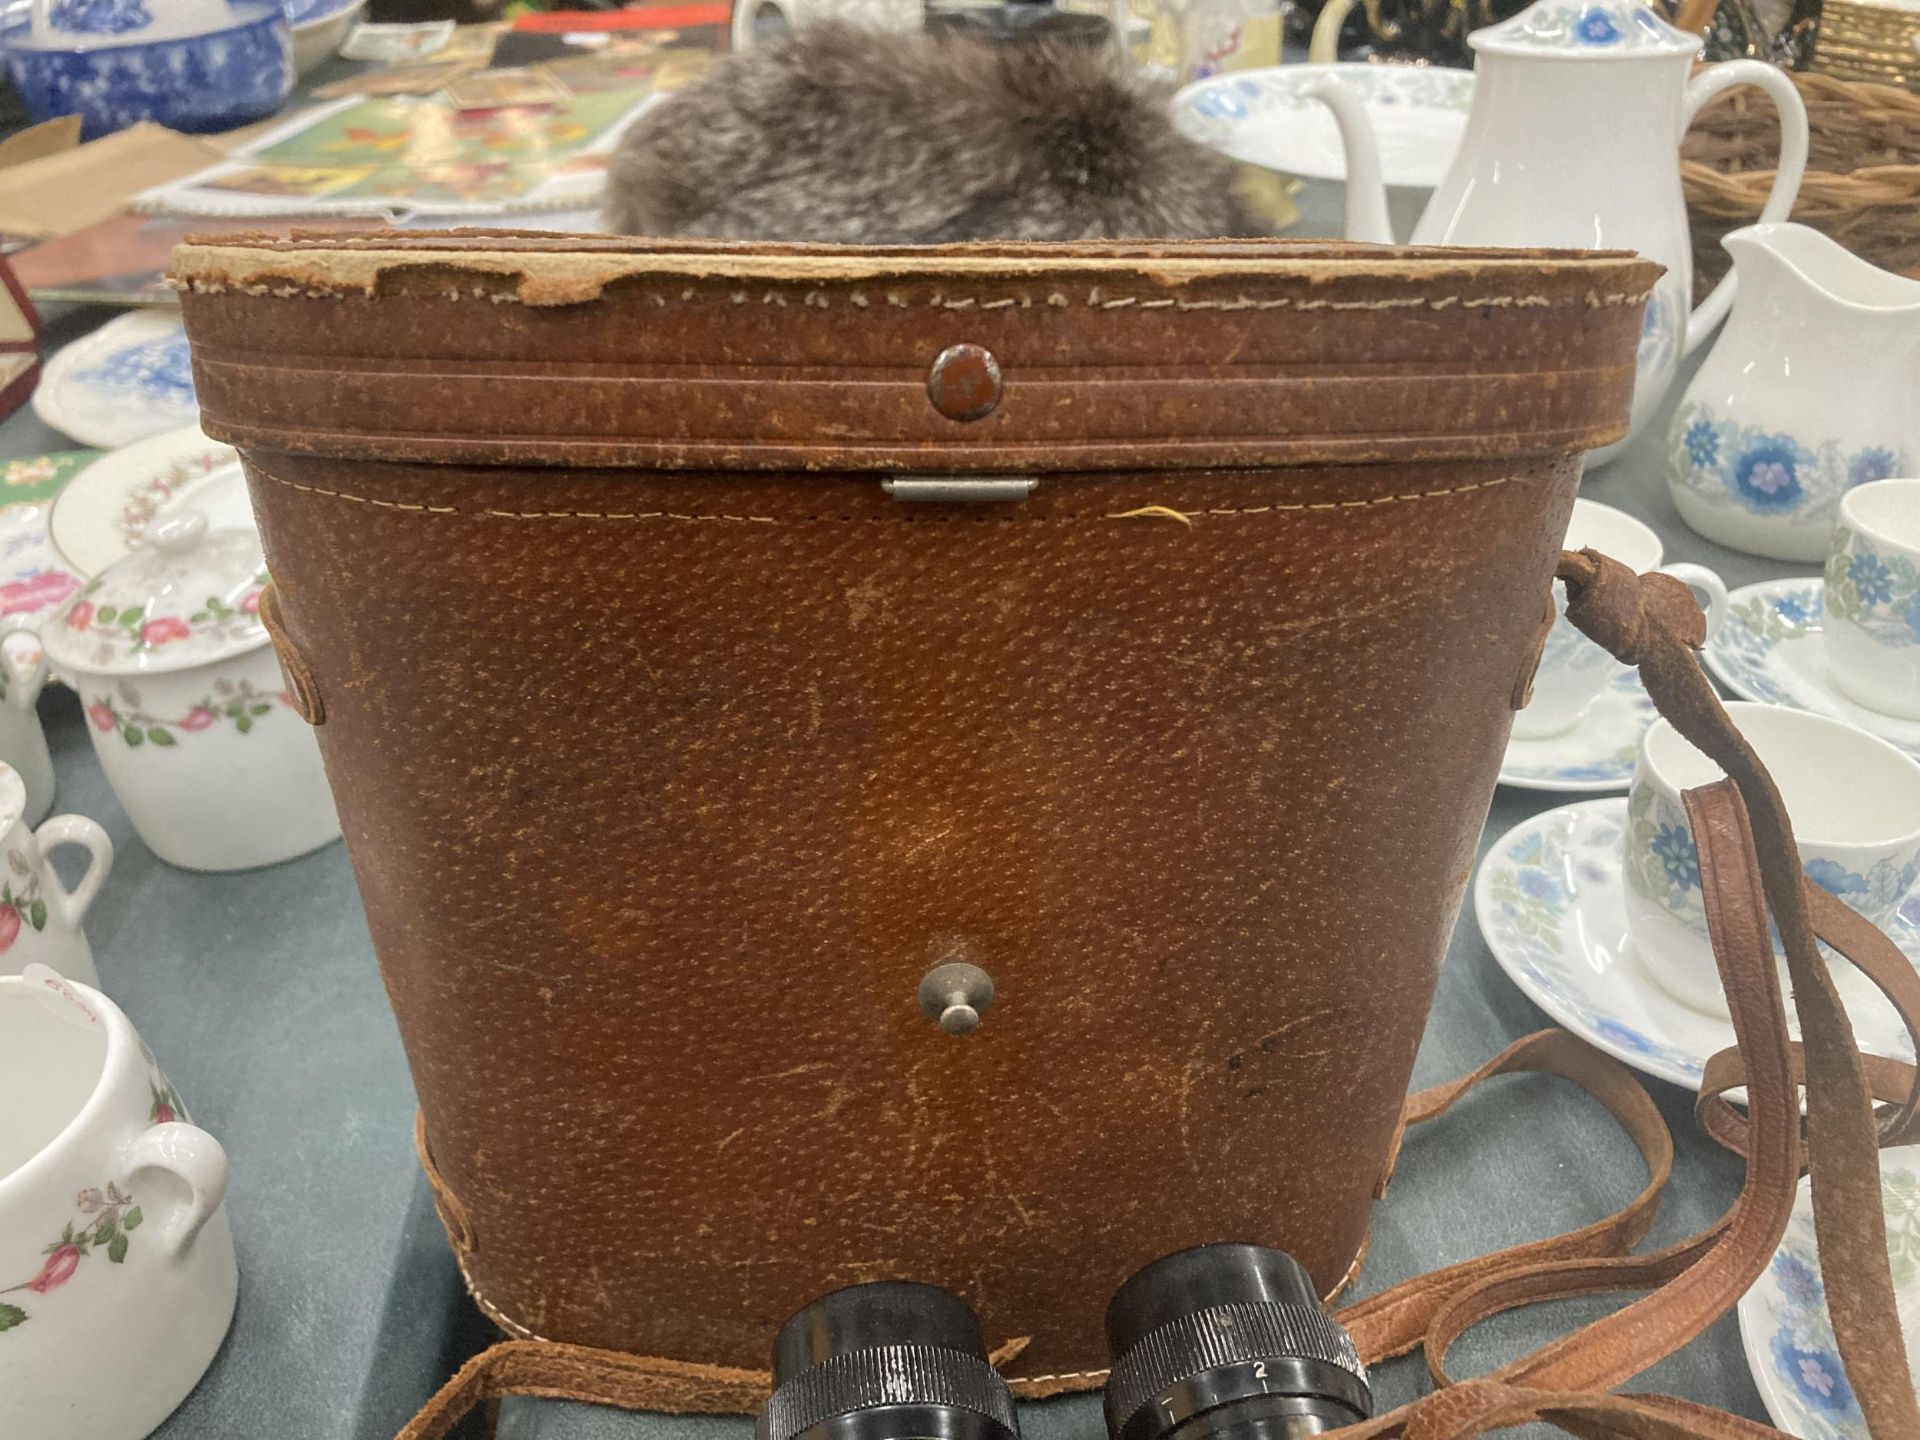 A PAIR OF ZENITH 7 X 50 FIELD BINOCULARS IN A LEATHER CASE - Image 5 of 5